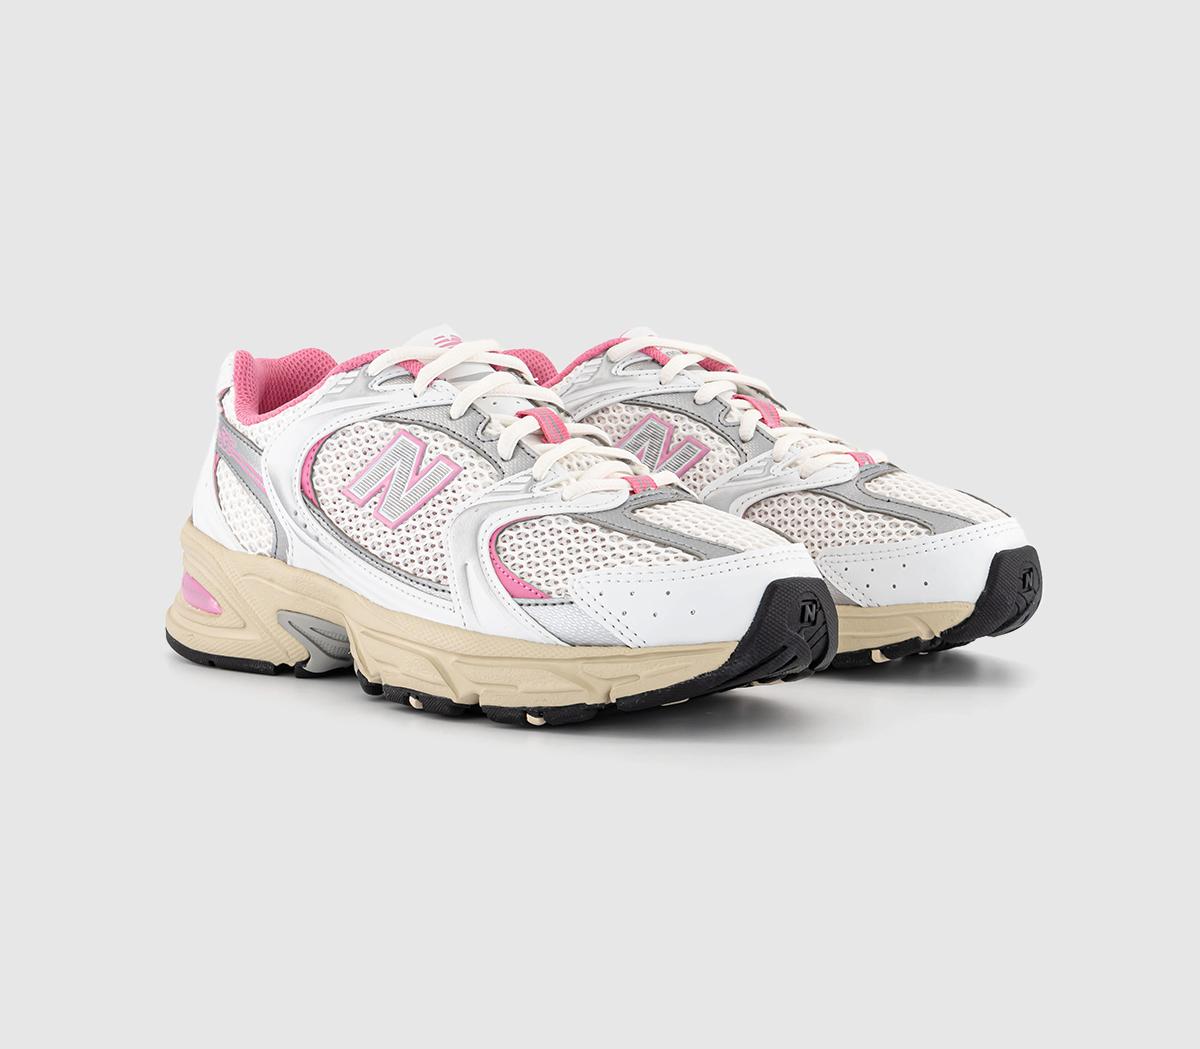 New Balance Womens Mr530 Trainers Off White Pink Silver, 4.5